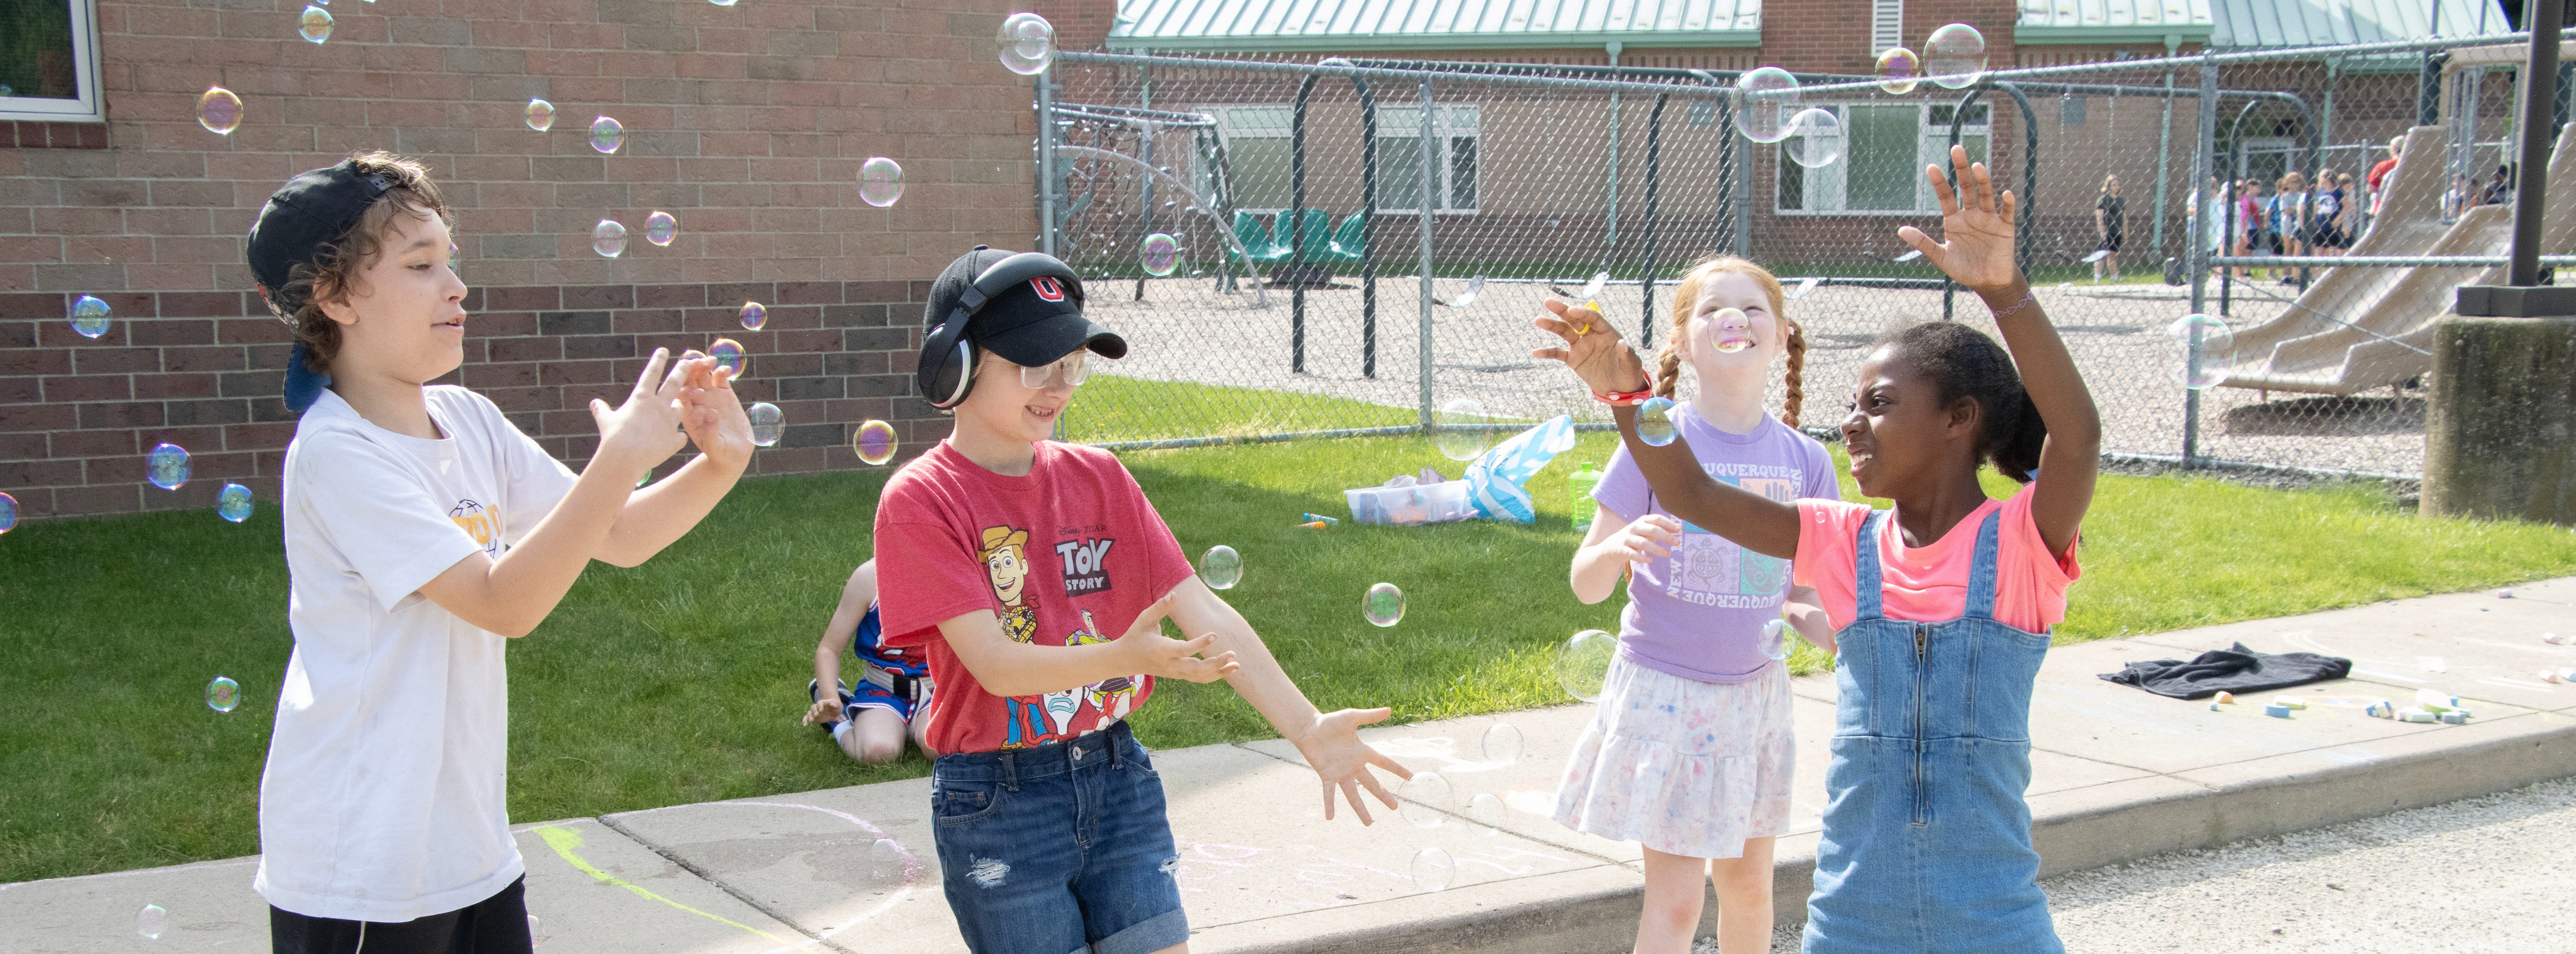 student playing with bubbles